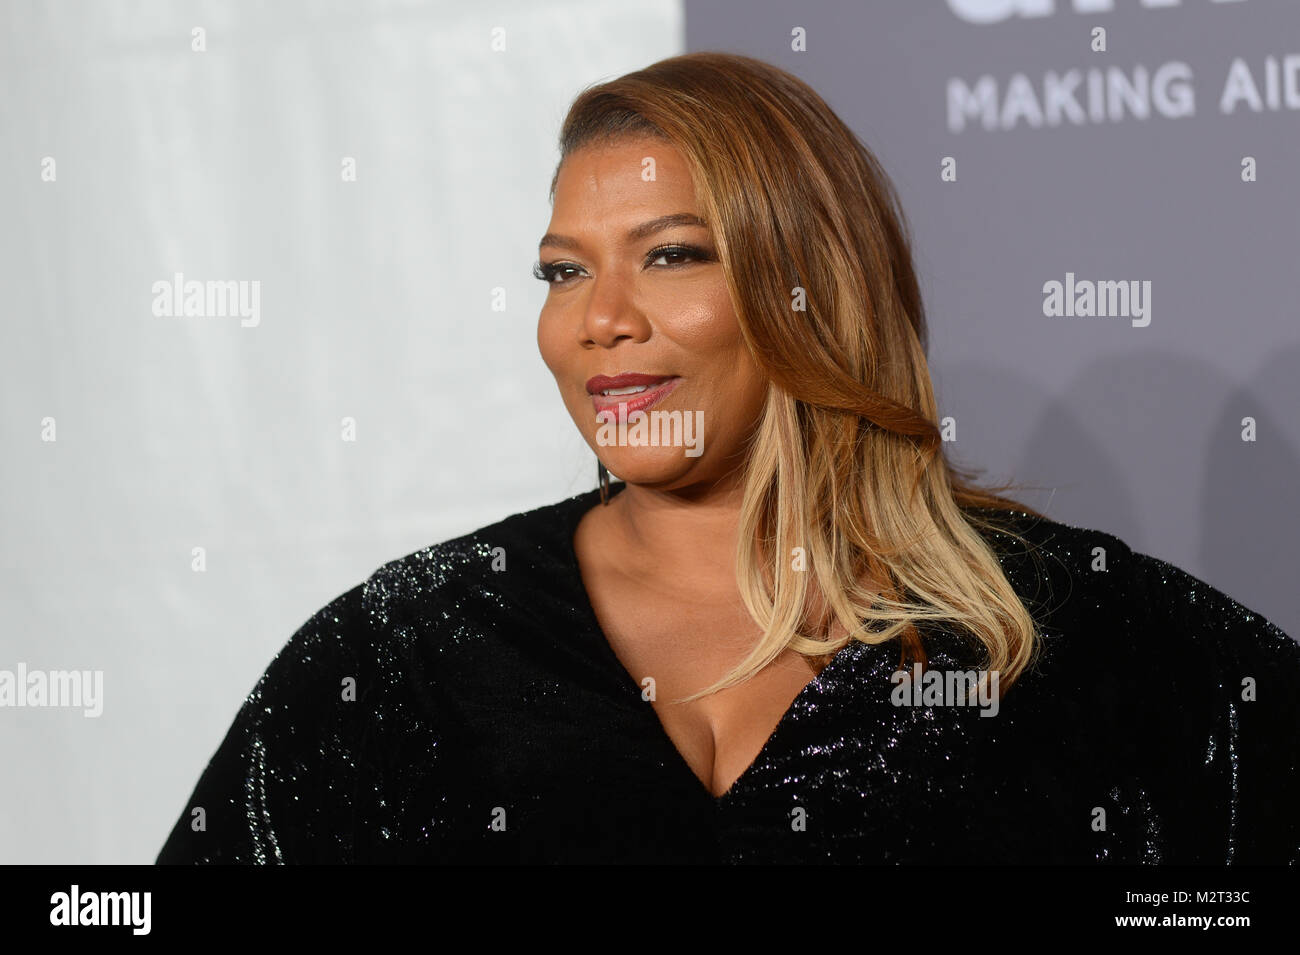 New York, USA. 7th Feb, 2018. Queen Latifah attends the 2018 amfAR Gala New York at Cipriani Wall Street on February 7, 2018 in New York City. Credit: Erik Pendzich/Alamy Live News Stock Photo